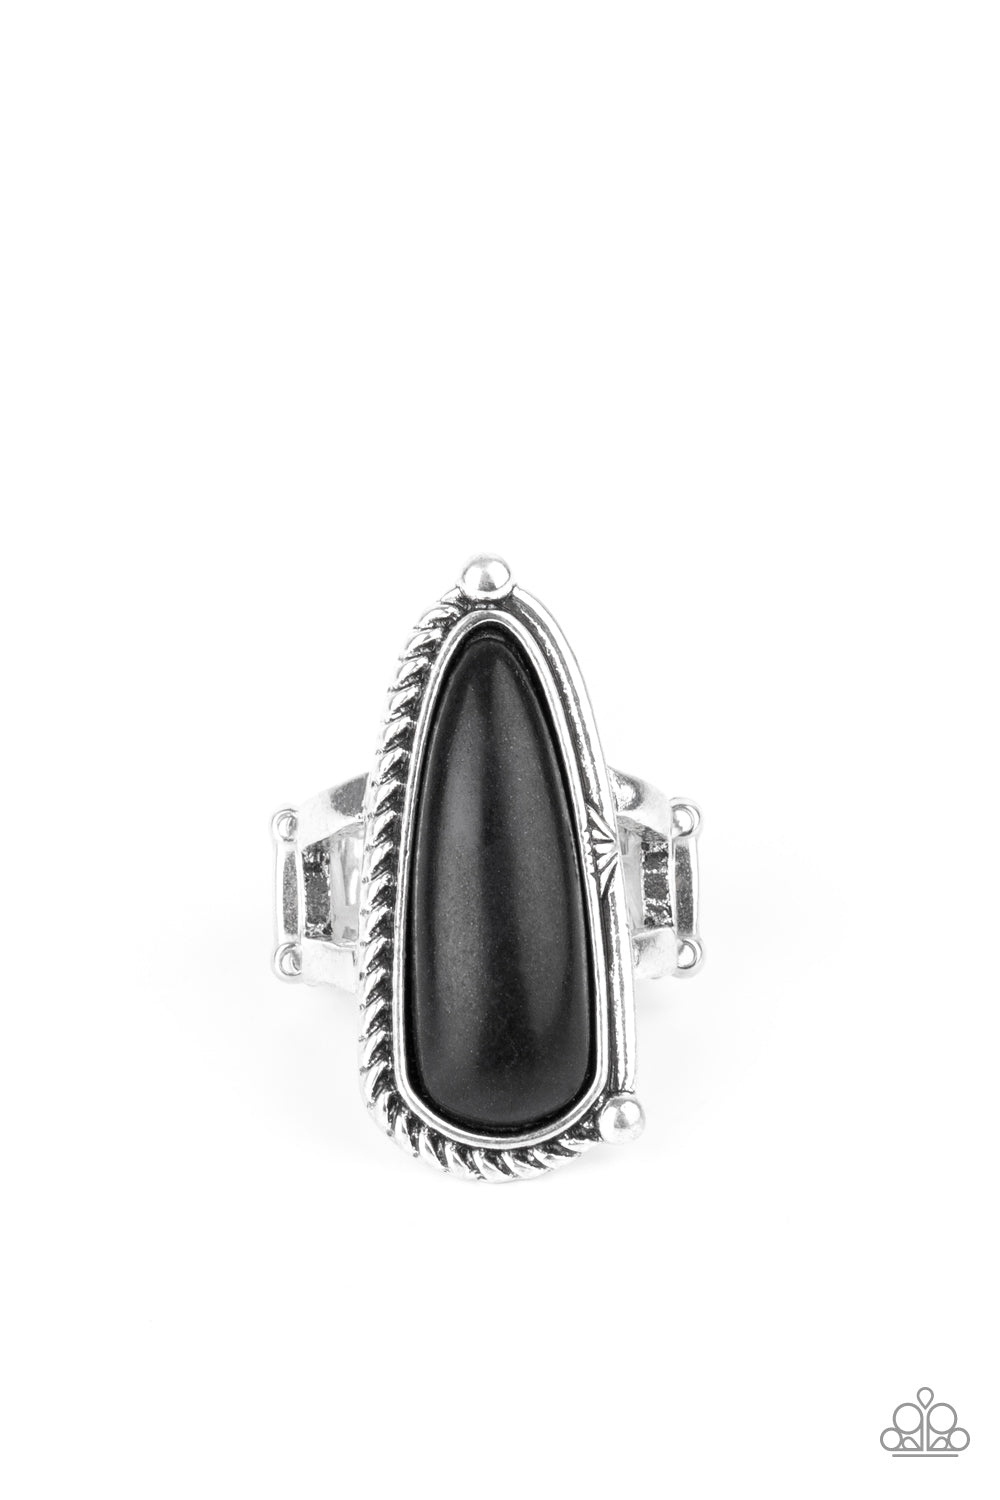 &lt;P&gt;Chiseled into an oblong teardrop shape, an earthy black stone is pressed into an asymmetrically patterned silver frame for an artisan inspired look. Features a stretchy band for a flexible fit.
&lt;/P&gt;  

&lt;P&gt; &lt;I&gt; Sold as one individual ring.  &lt;/I&gt;  &lt;/P&gt;

&lt;img src=\&quot;https://d9b54x484lq62.cloudfront.net/paparazzi/shopping/images/517_tag150x115_1.png\&quot; alt=\&quot;New Kit\&quot; align=\&quot;middle\&quot; height=\&quot;50\&quot; width=\&quot;50\&quot;/&gt;